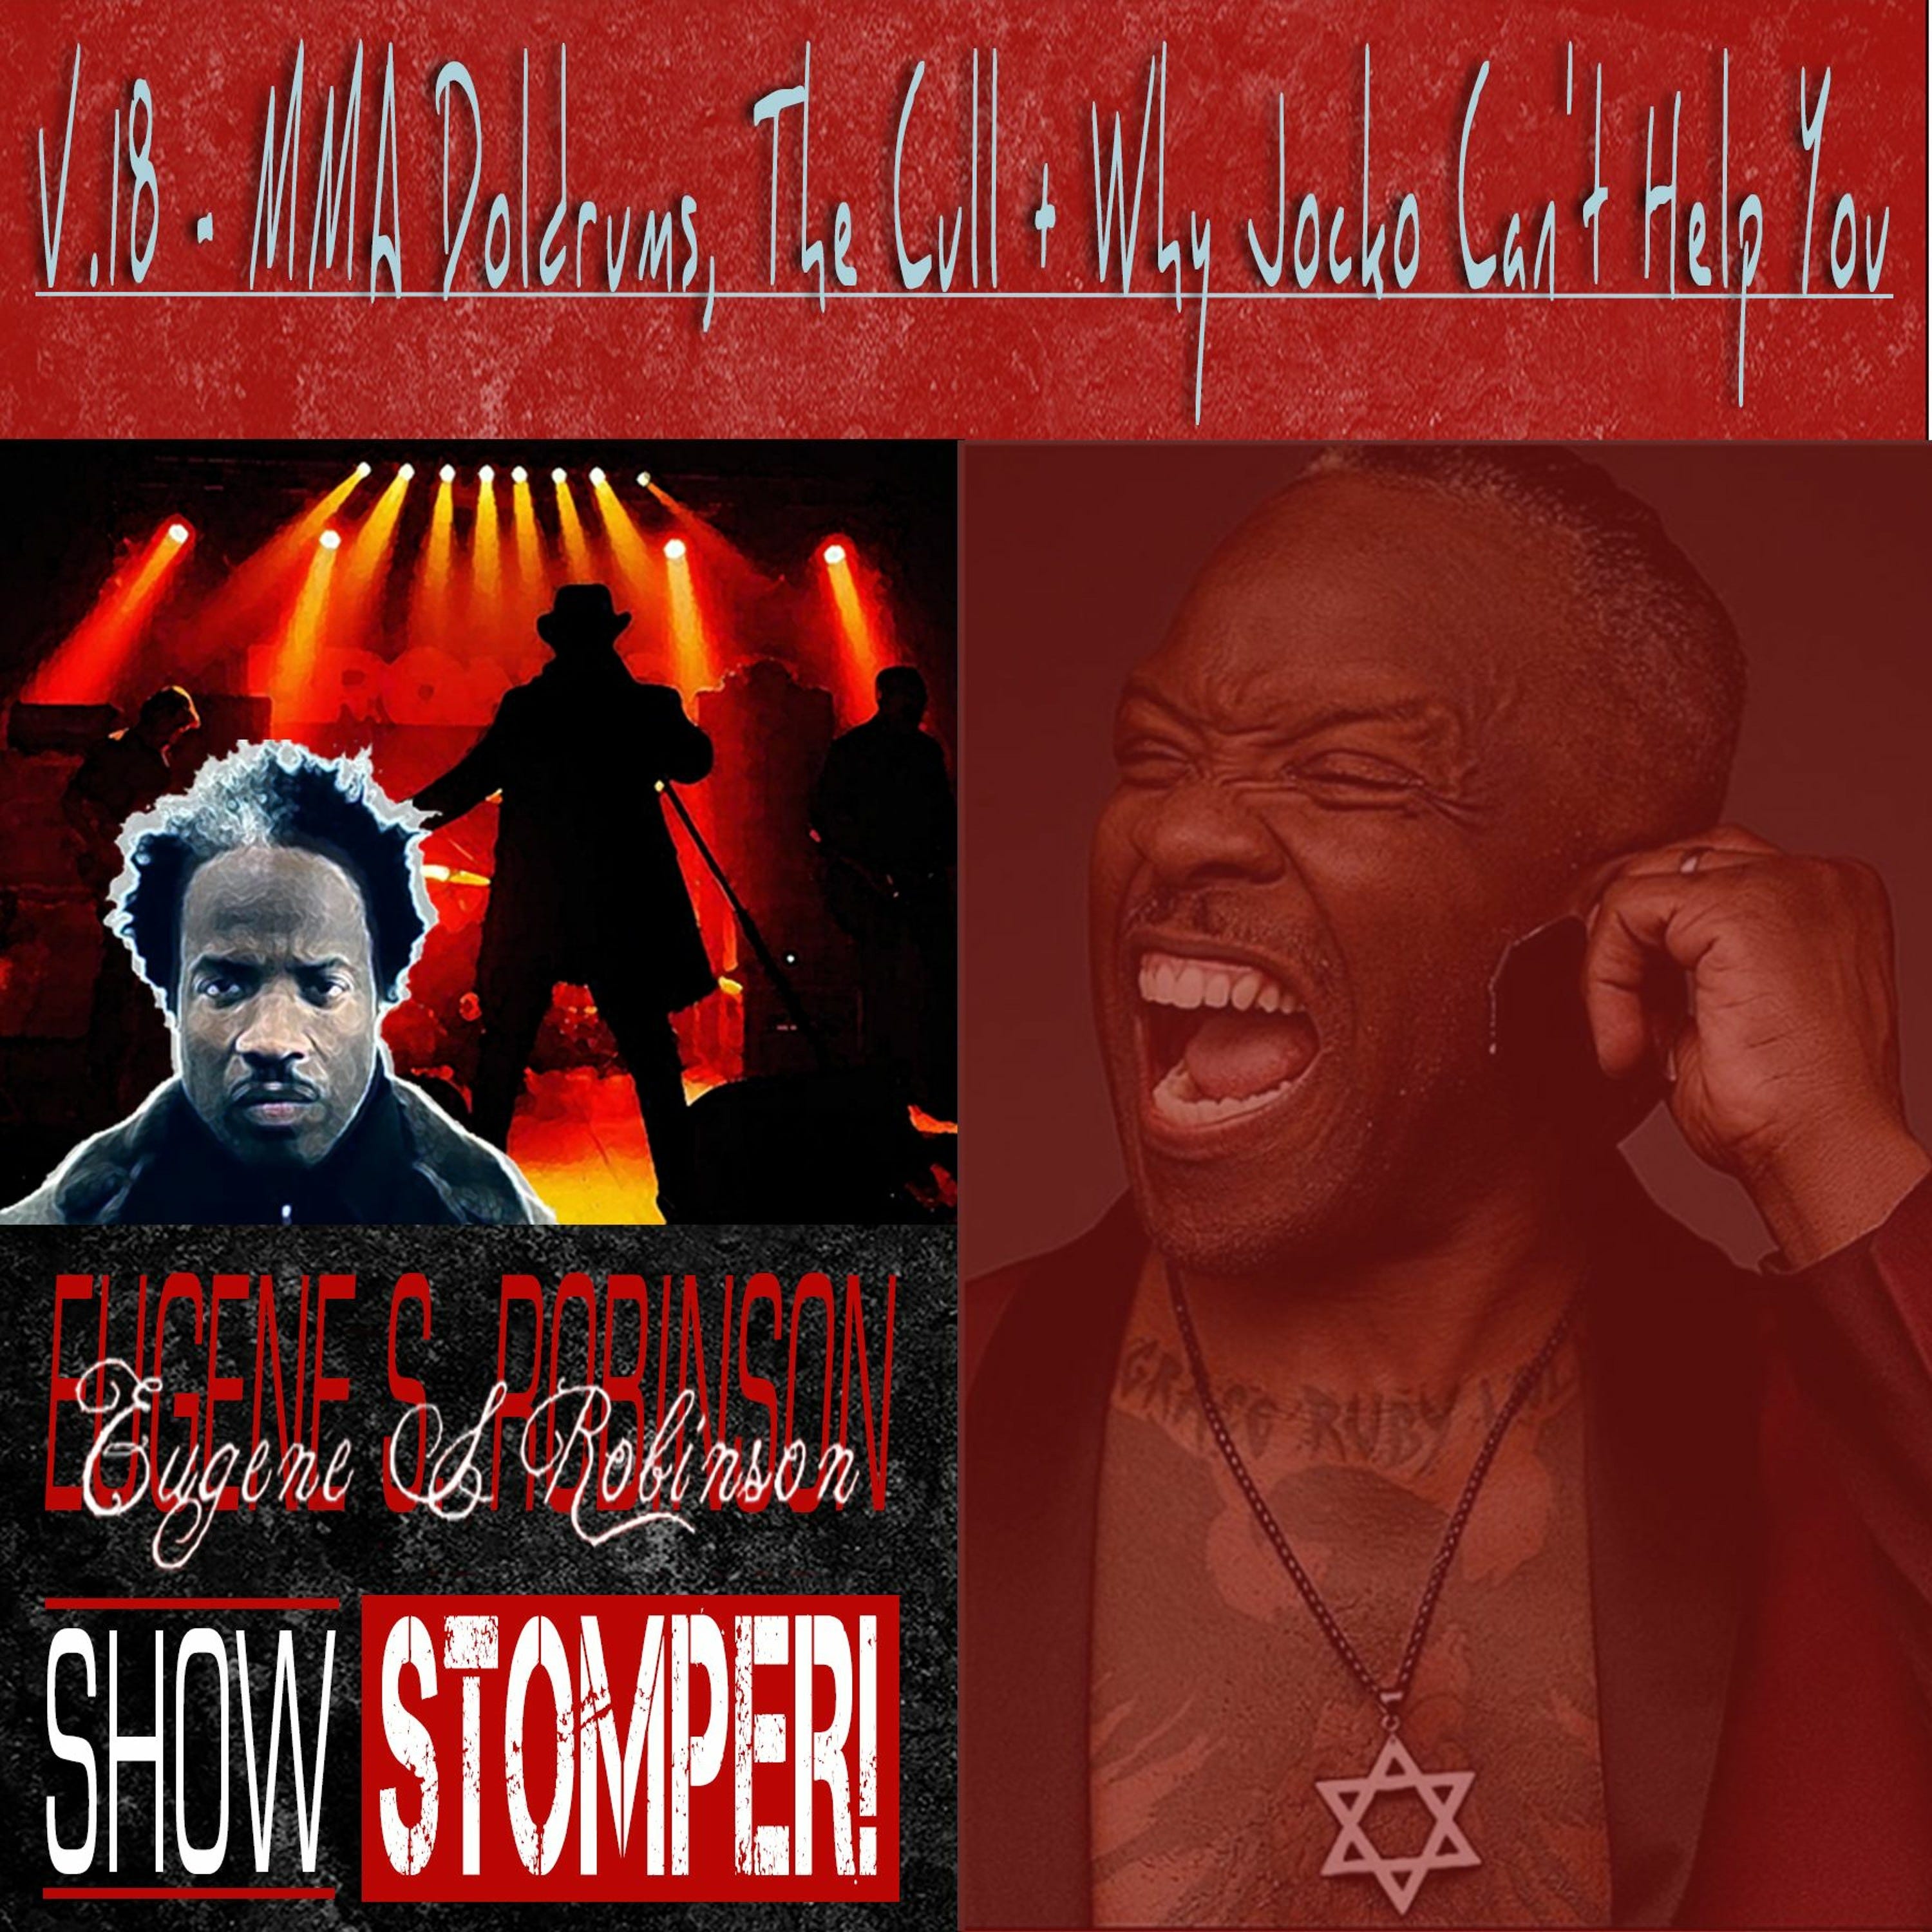 The Eugene S. Robinson Show Stomper! V.18 - MMA Doldrums The Cull + Why Jocko Cant Help You